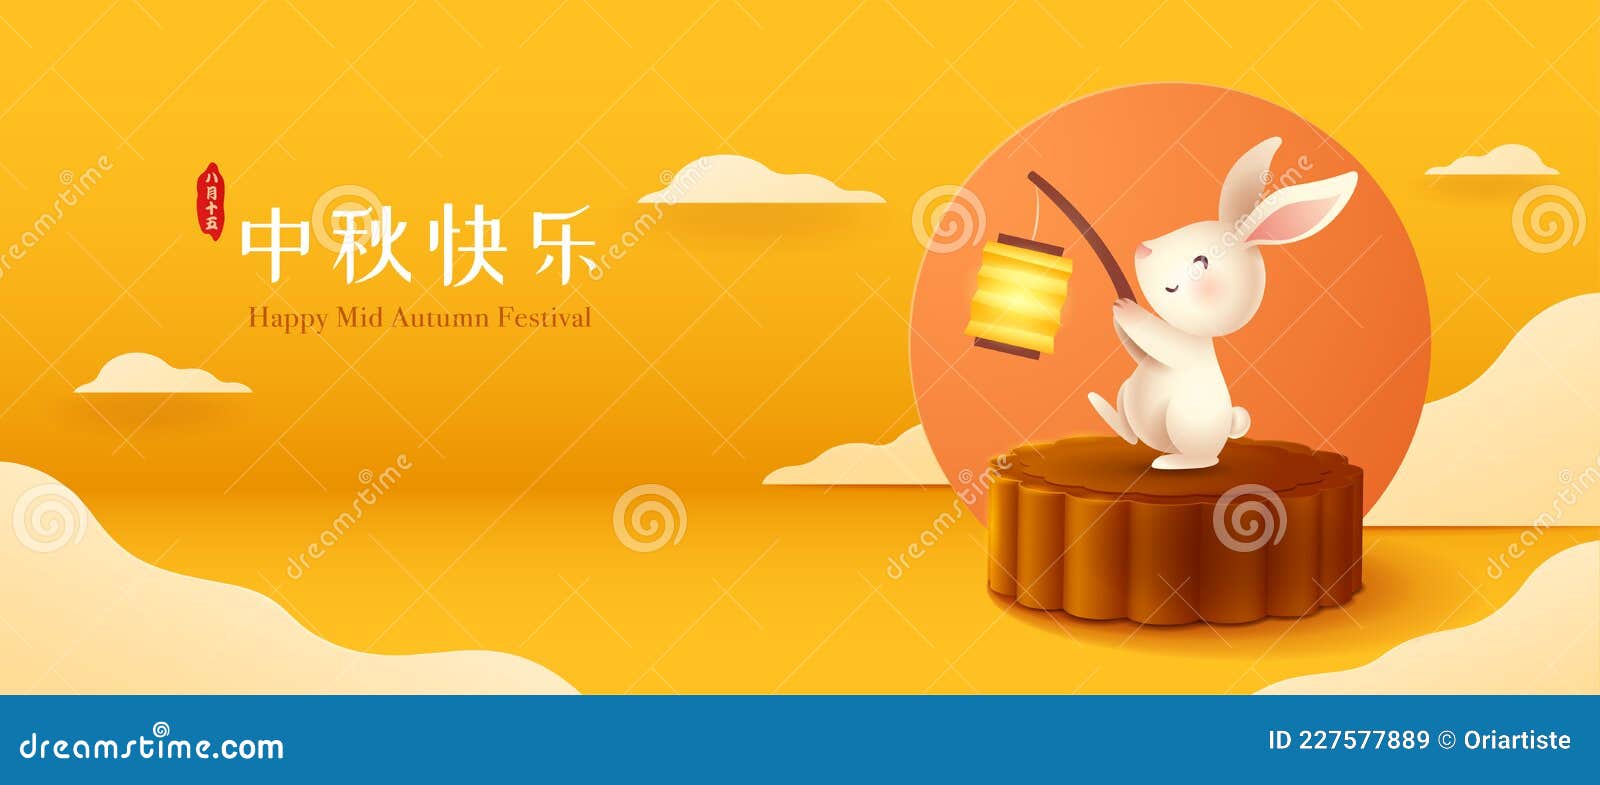 3d  of mid autumn mooncake festival theme with cute rabbit character on mooncake podium on paper graphic oriental clou